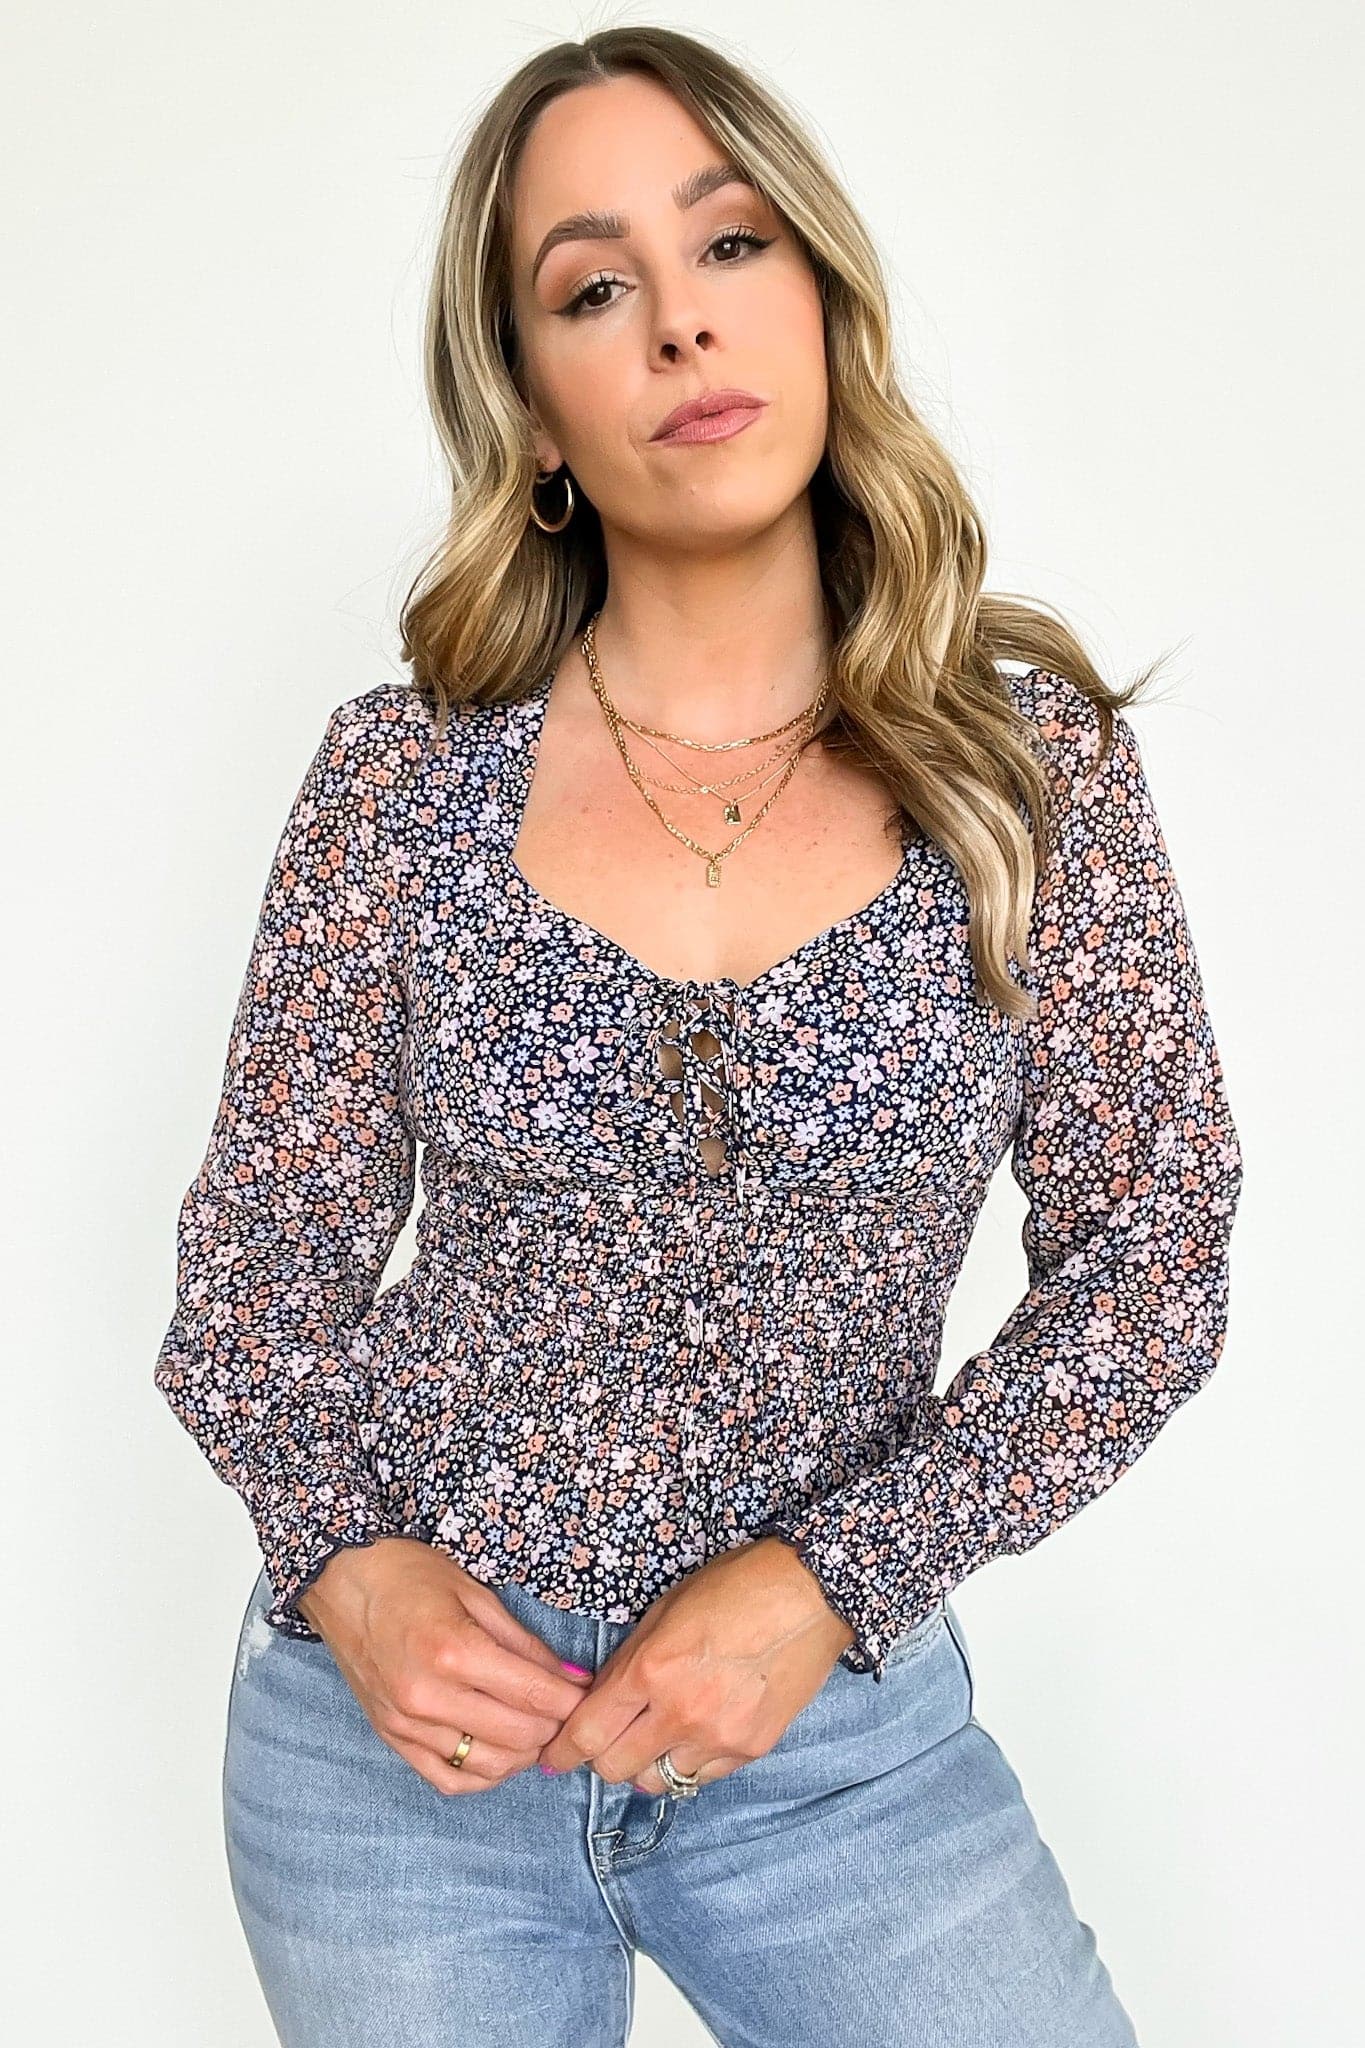  Daryan Floral Print Smocked Top - FINAL SALE - Madison and Mallory